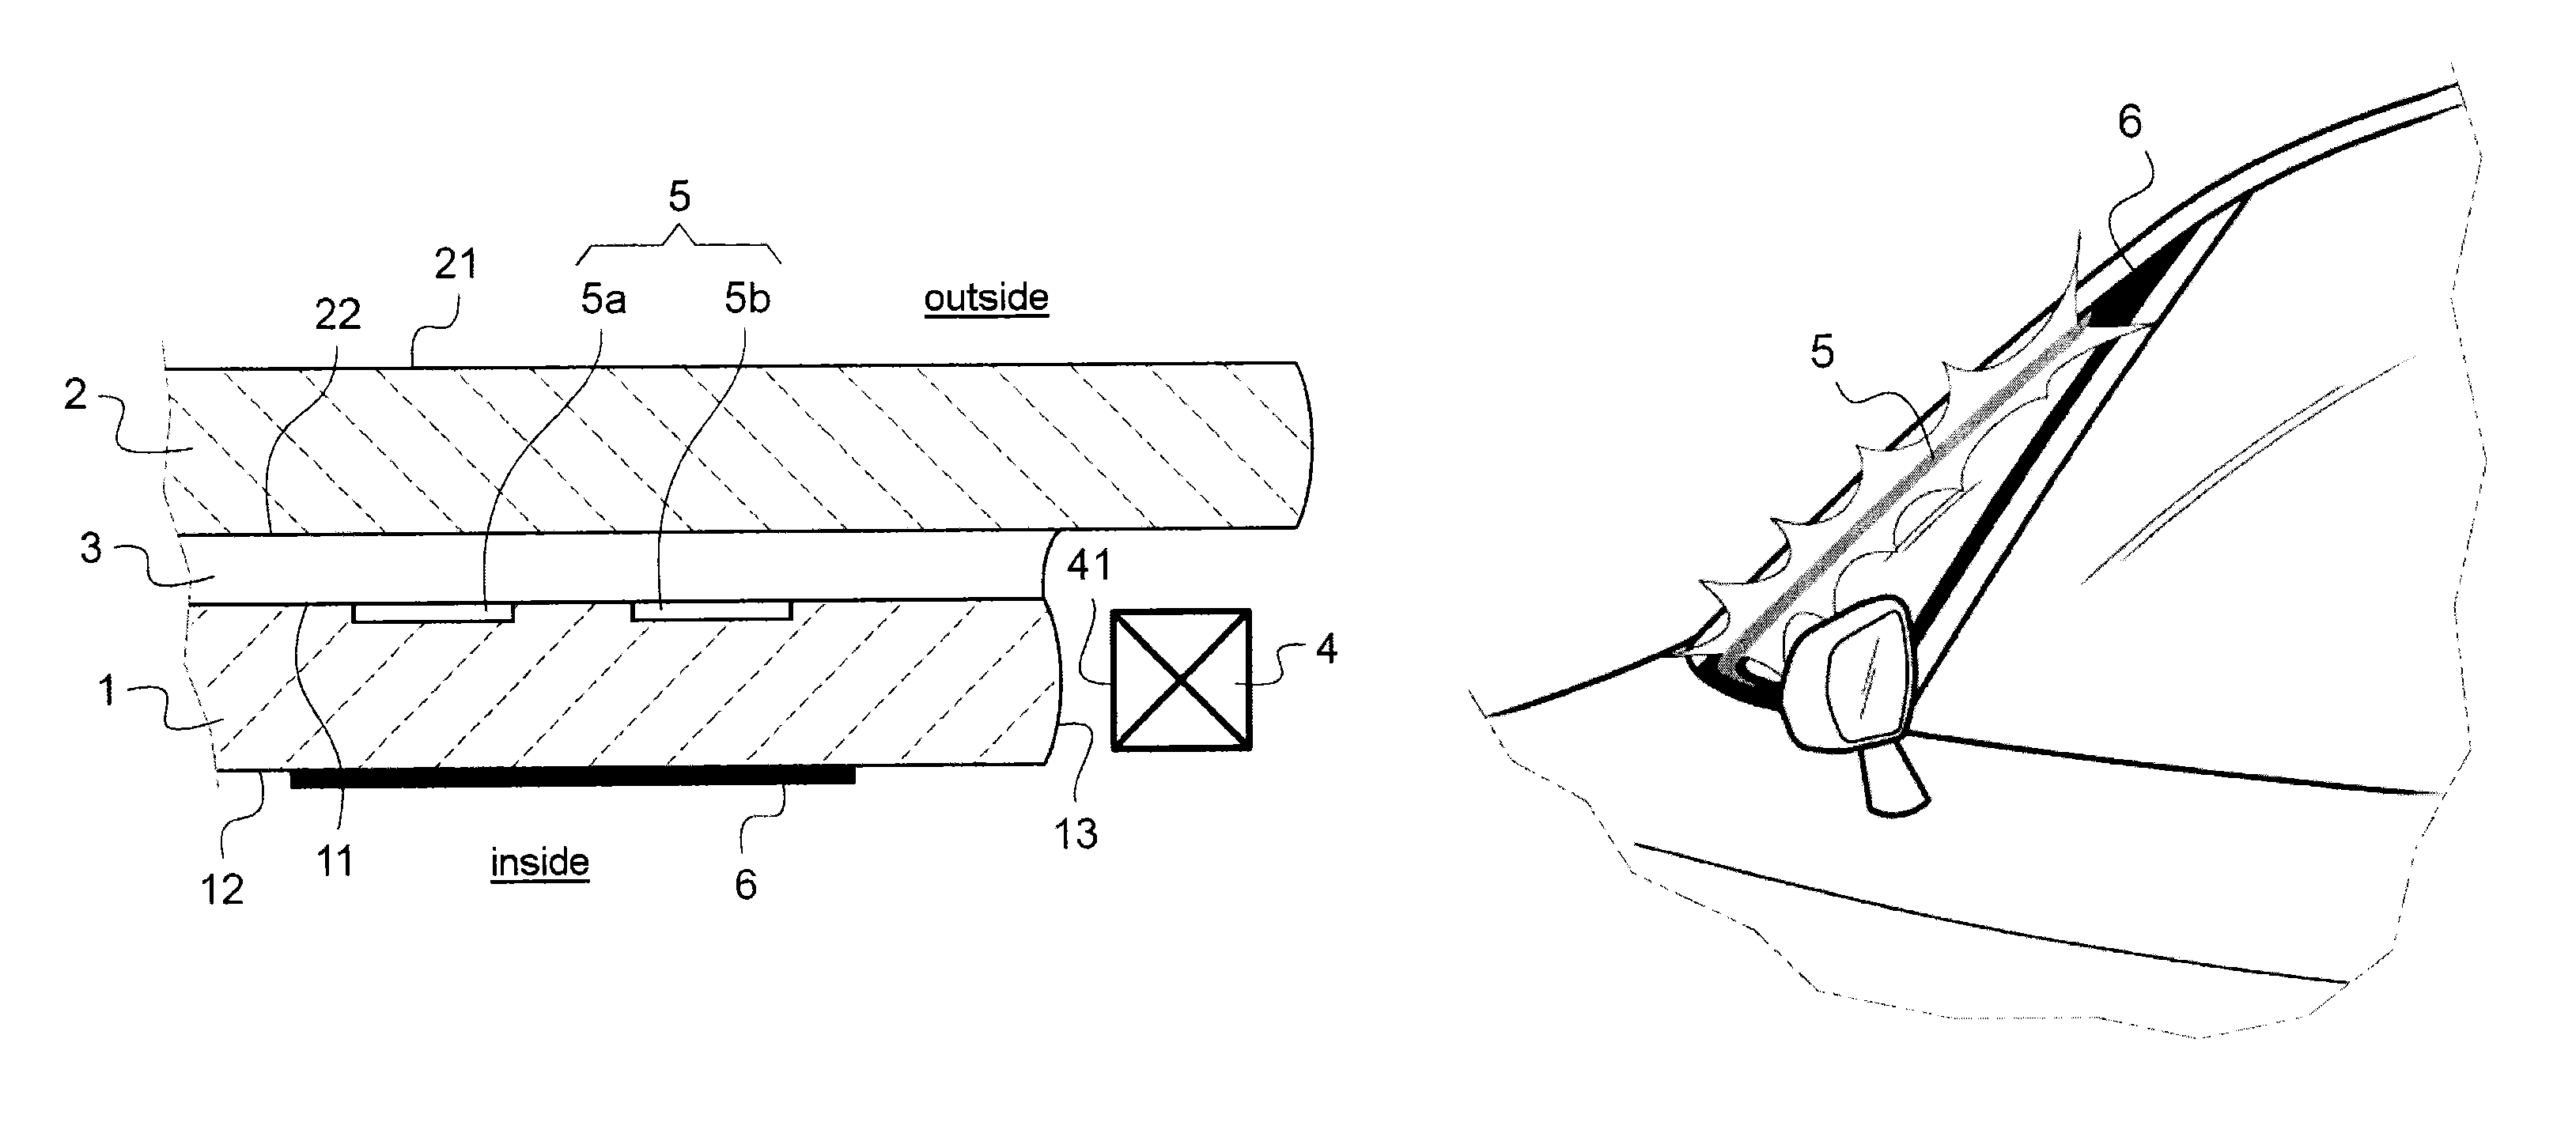 Light-signaling glazing for a vehicle